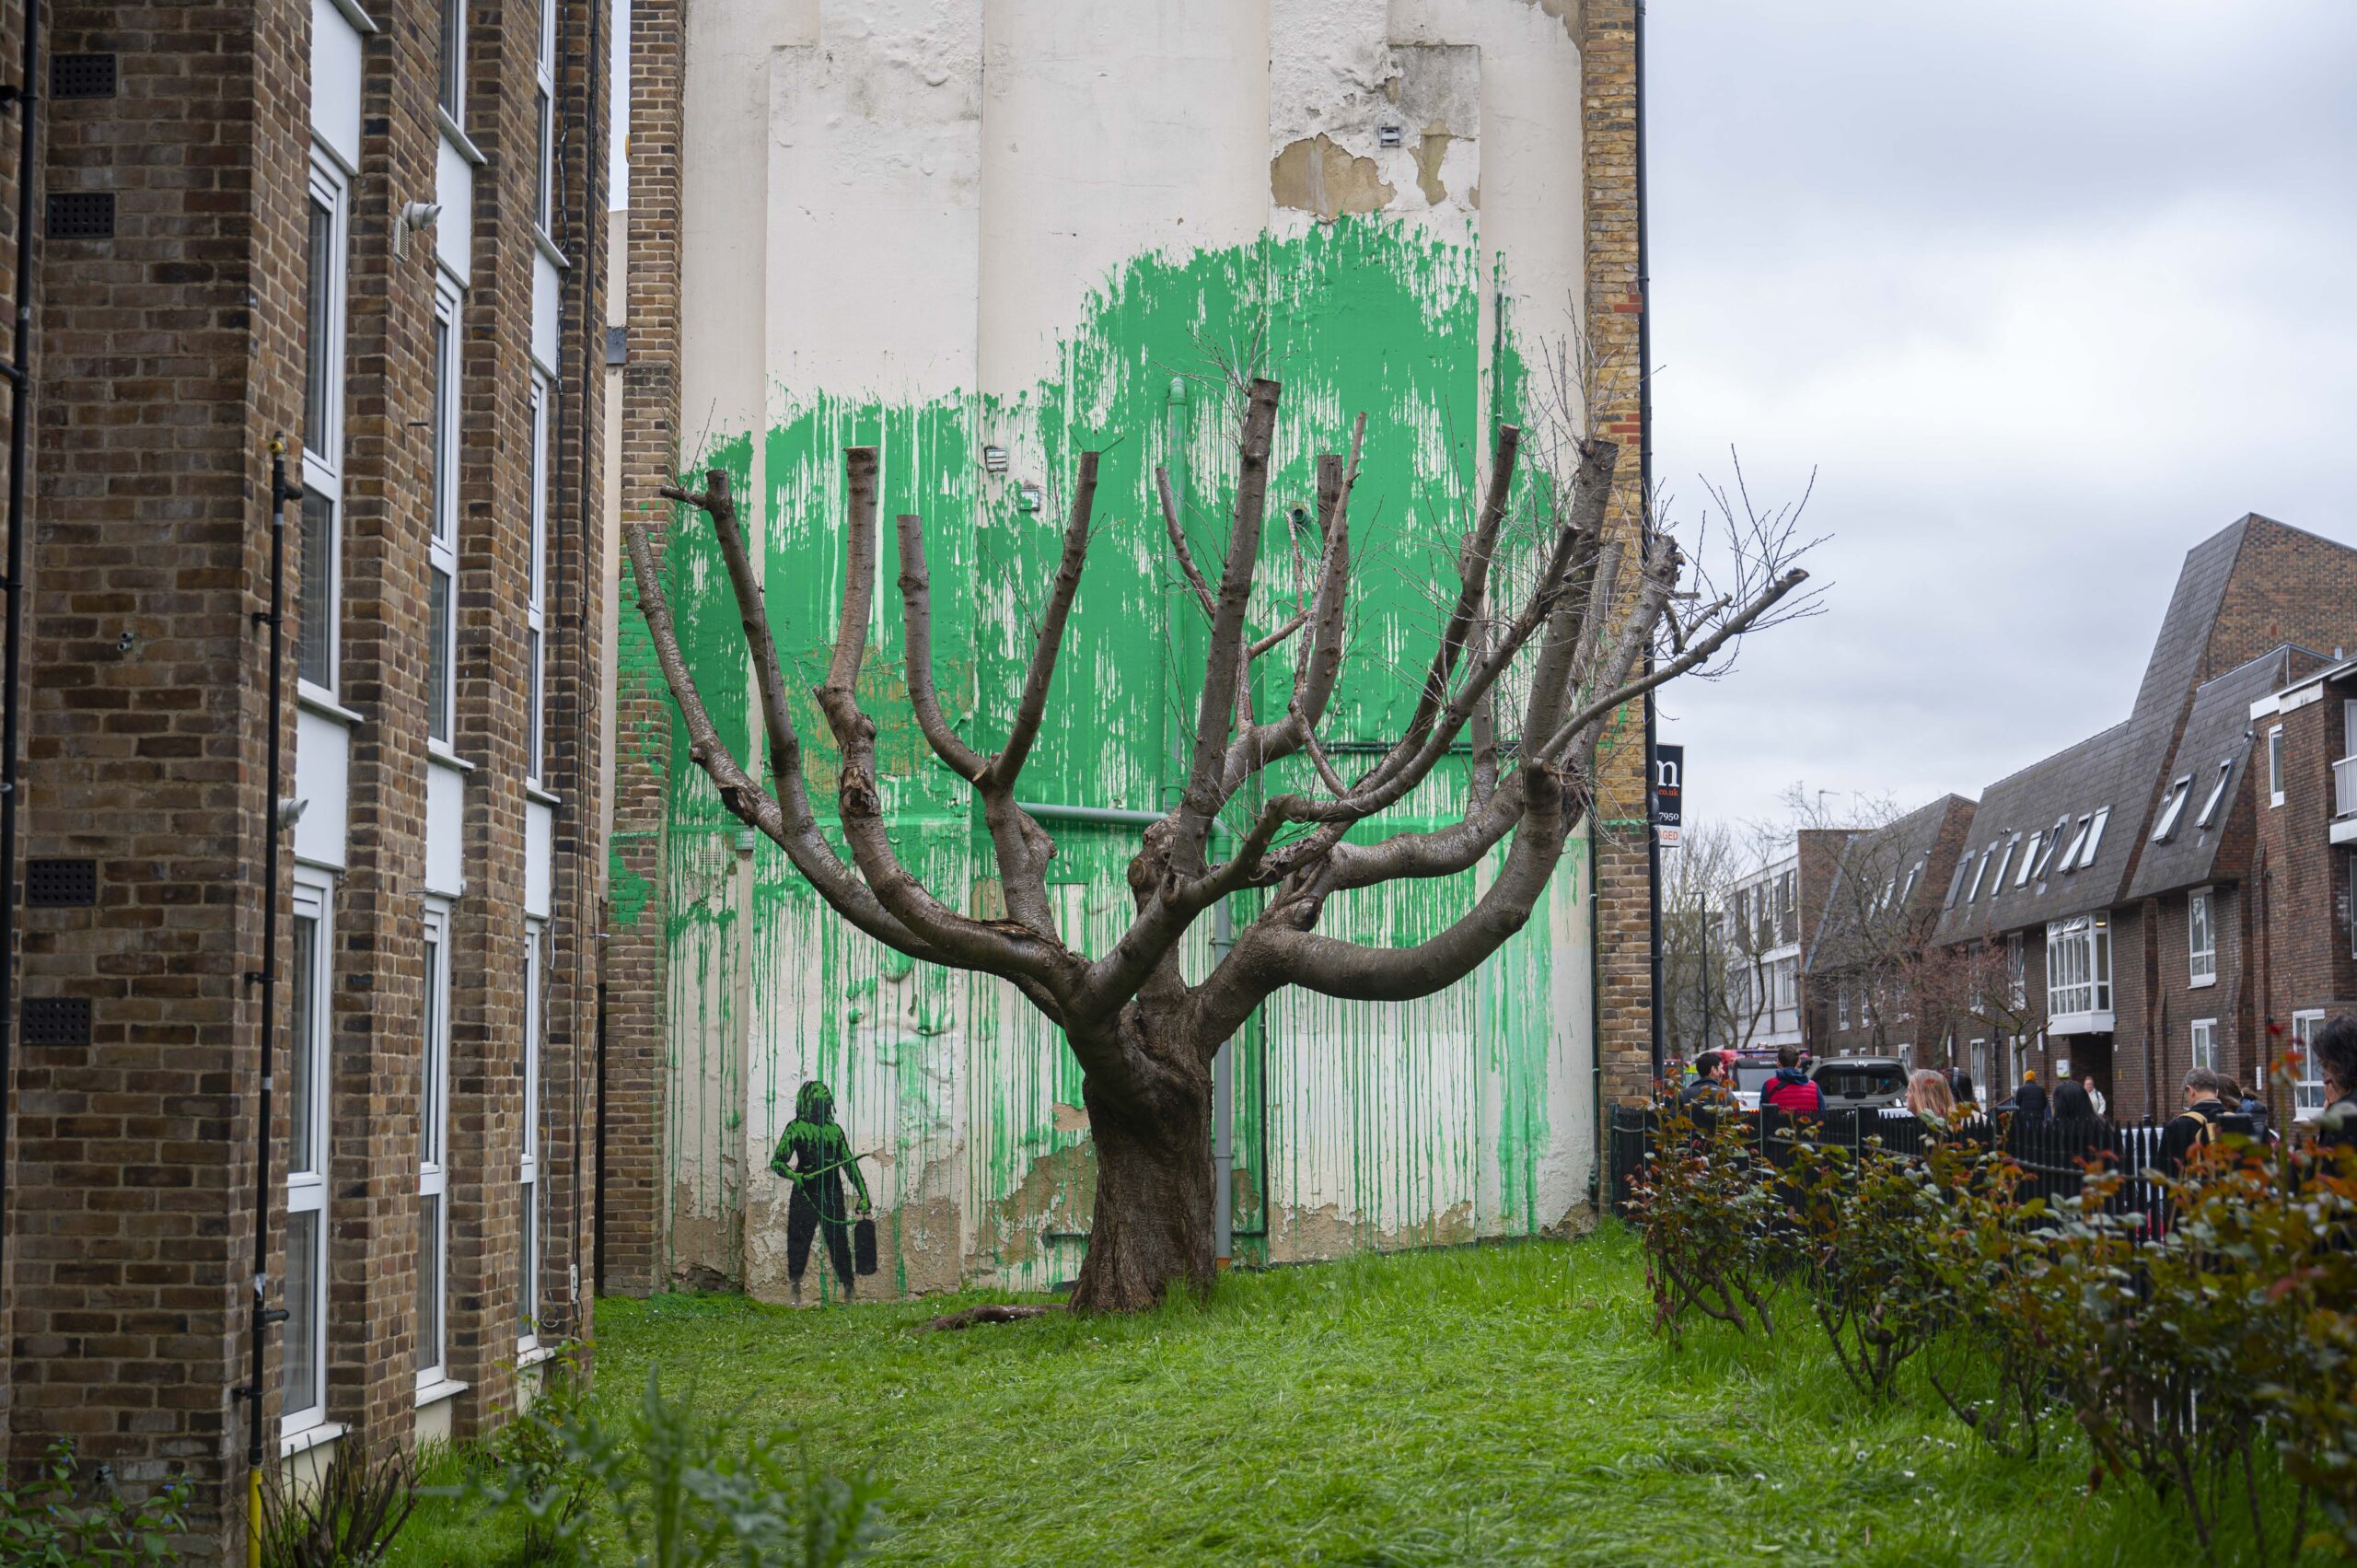 Green graffiti painting on building that resembles foliage of barren tree